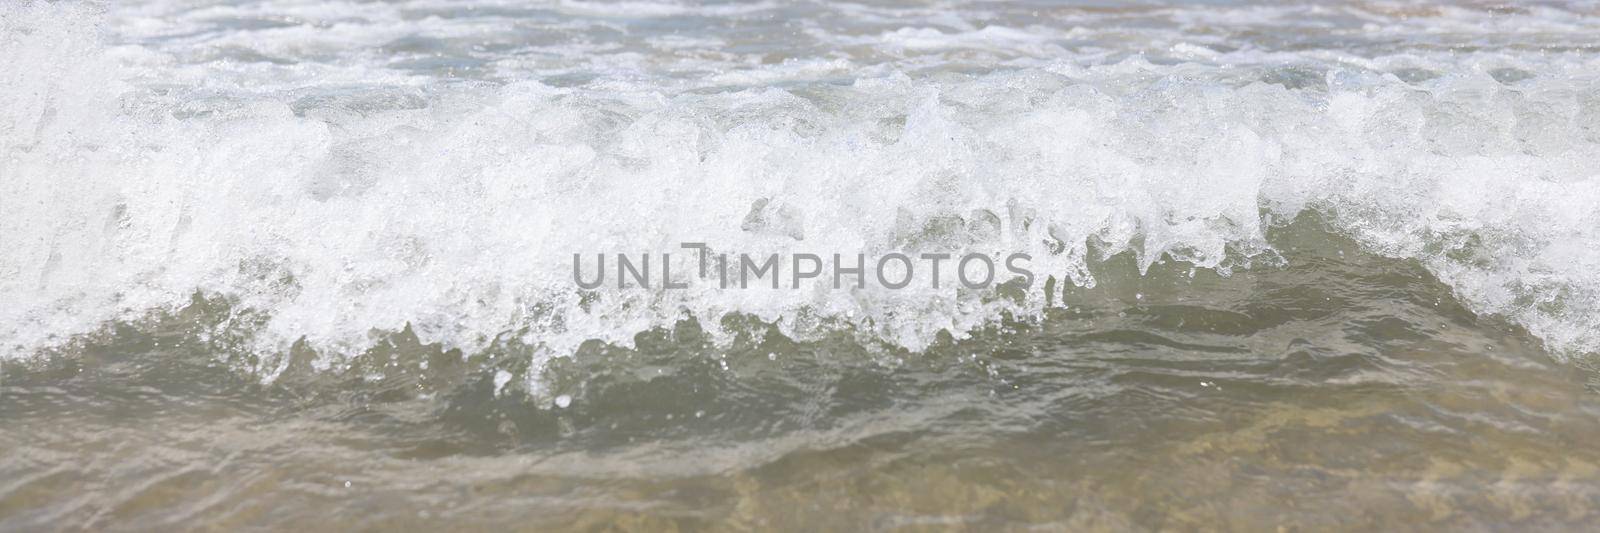 Close-up of blue sea waves, sandy coastline, choppy sea, clean water. People on horizon swimming in water. Beach, ocean, black sea, holiday, summer, relaxation concept